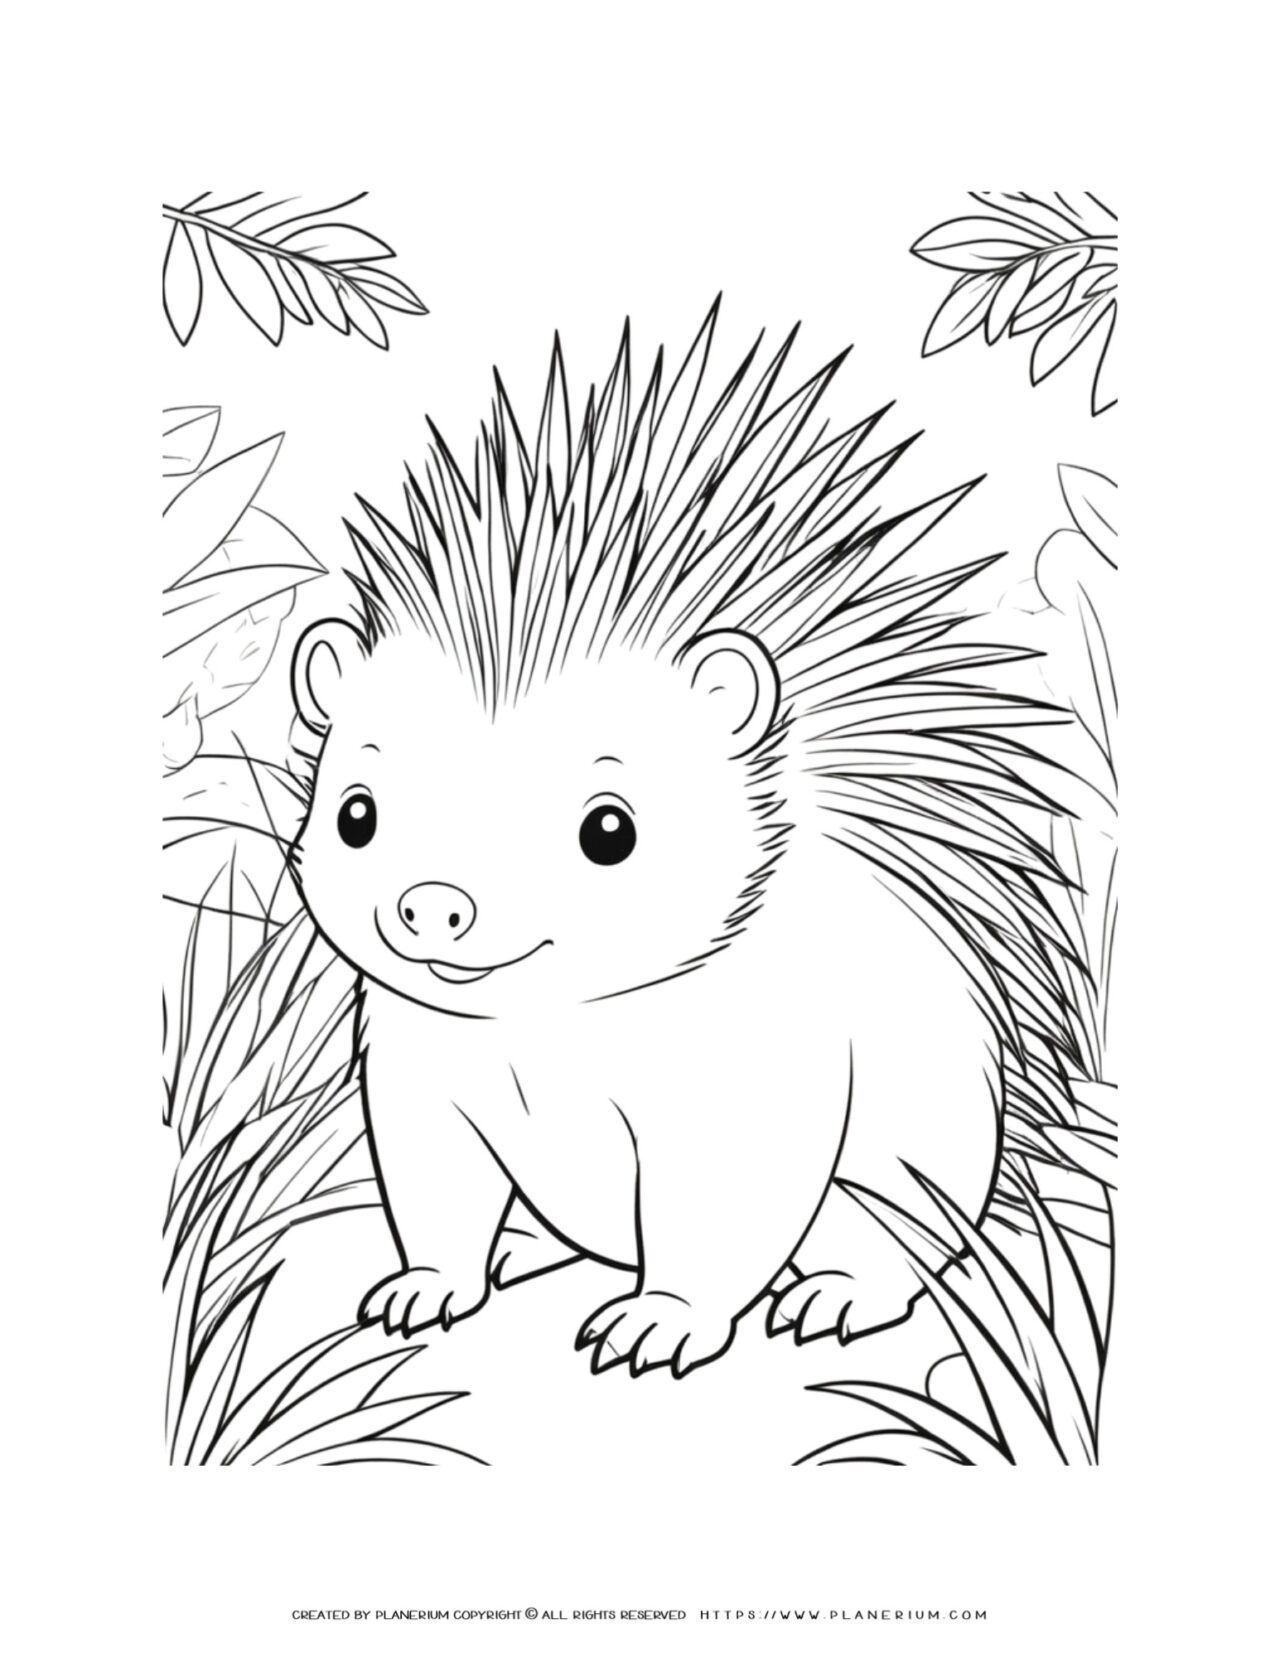 porcupine-in-the-wild-coloring-page